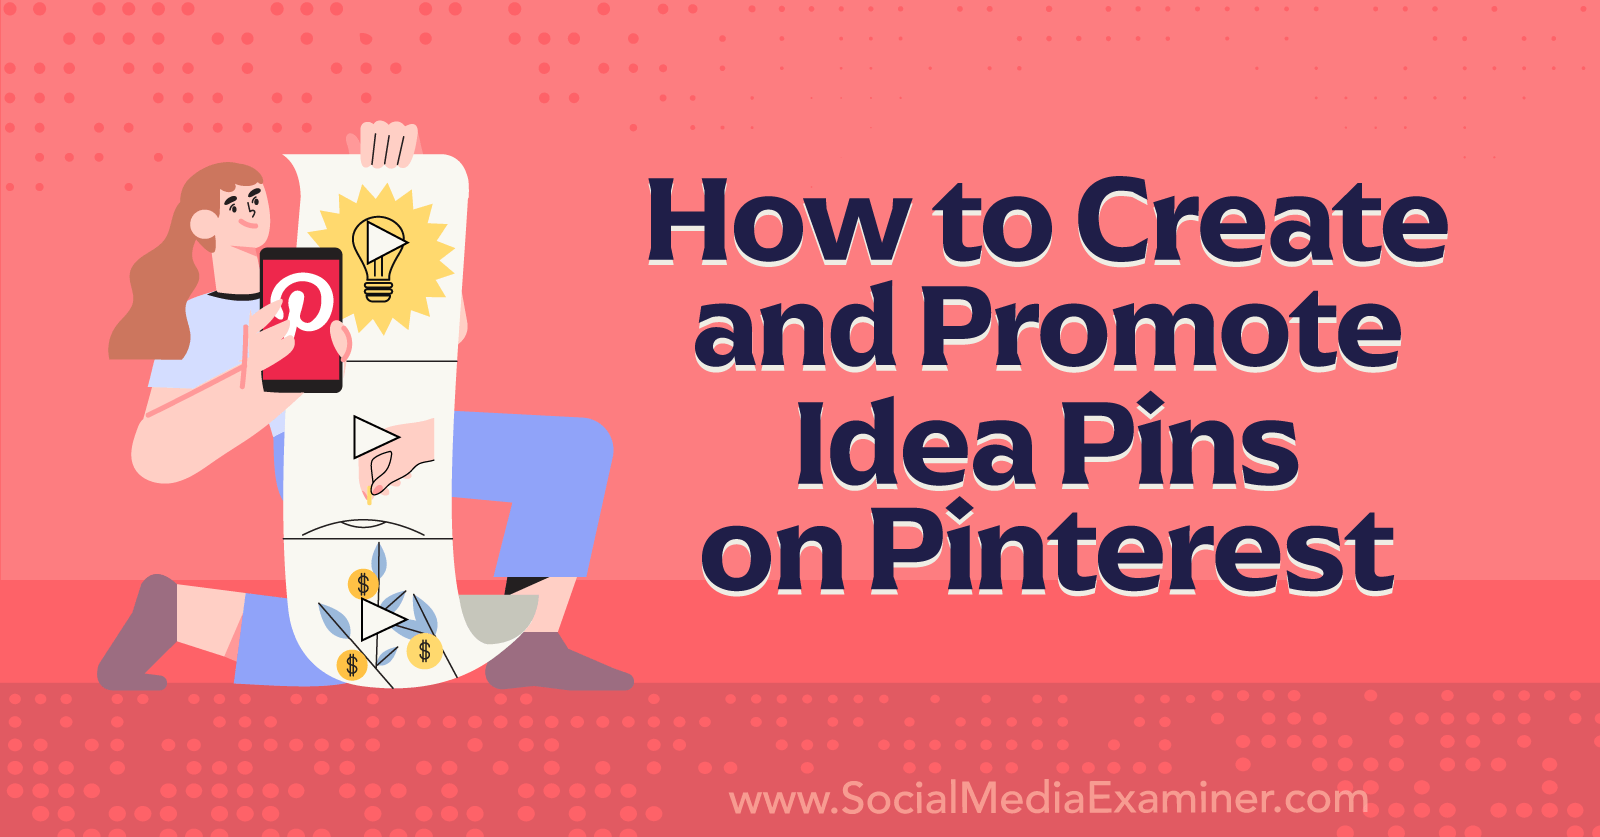 How to Create and Promote Idea Pins on Pinterest-Social Media Examiner